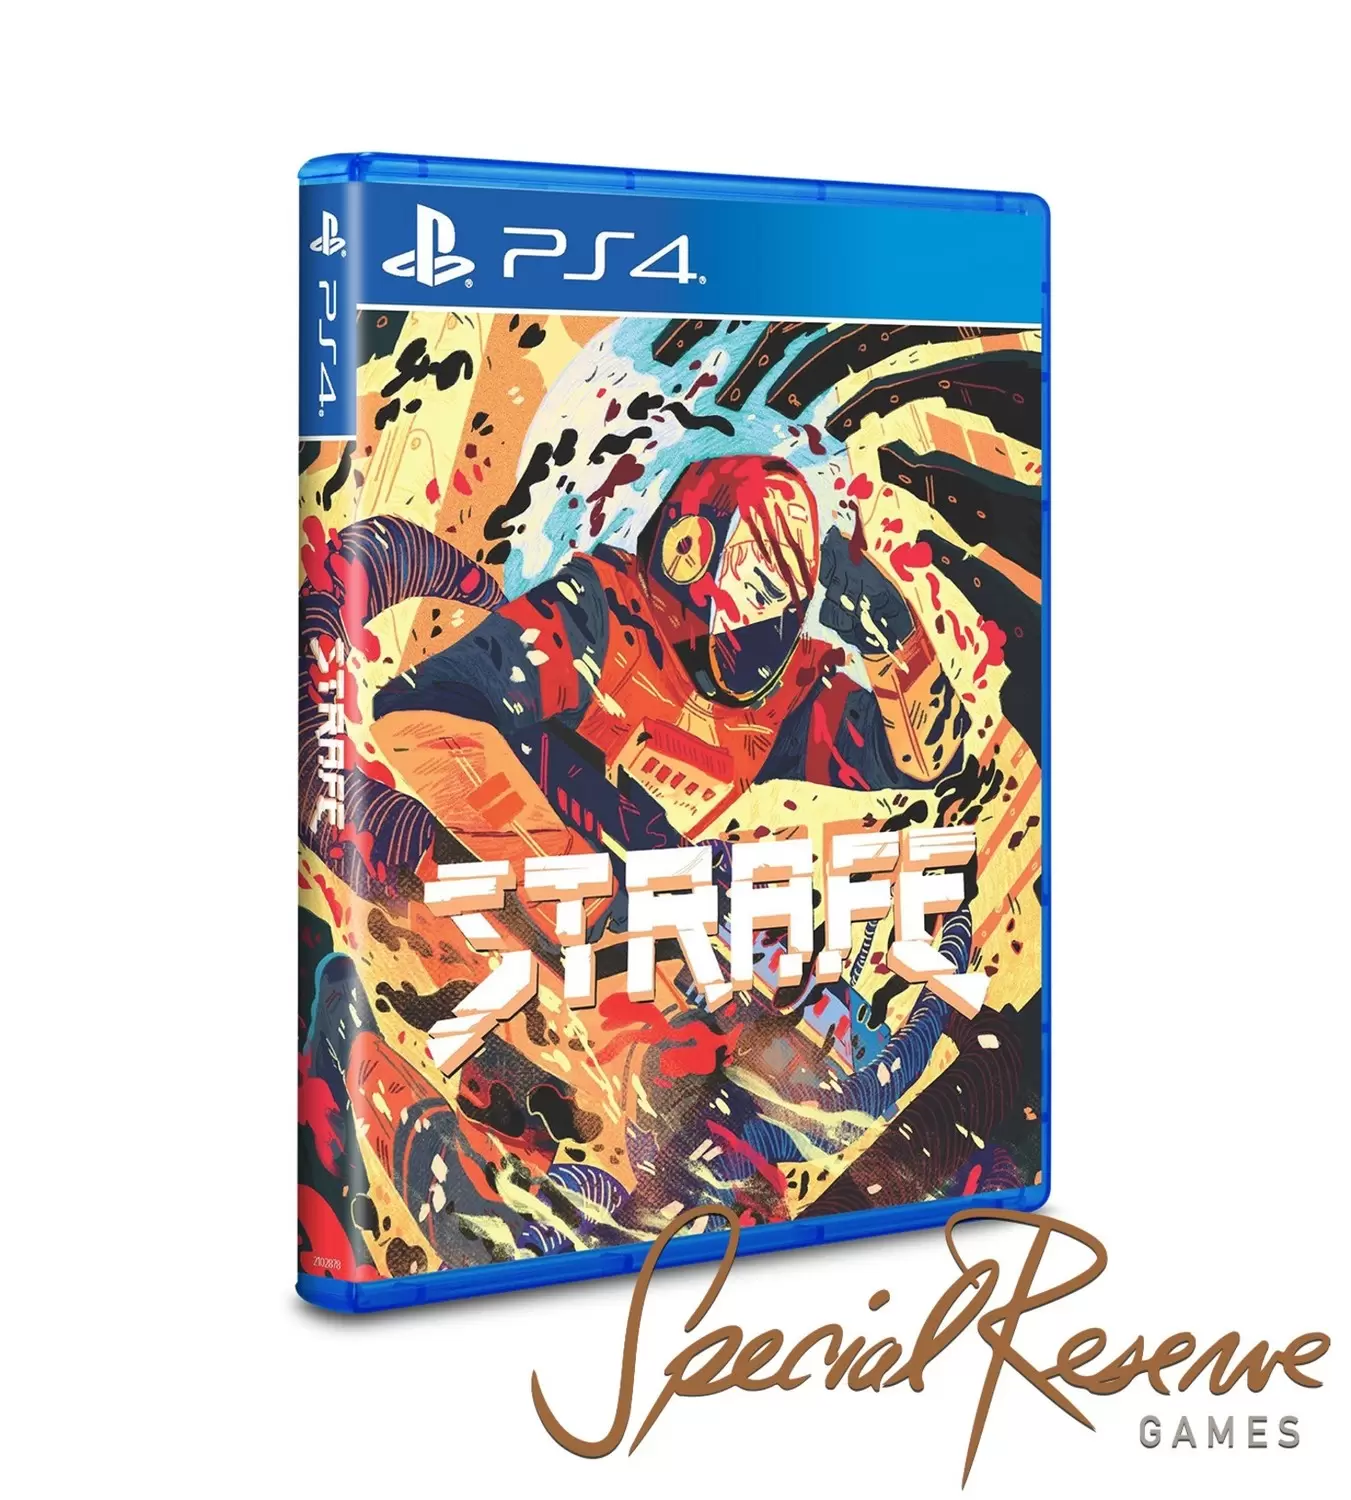 Jeux PS4 - Strafe 1996 - Limited Run Games Exclusive Variant